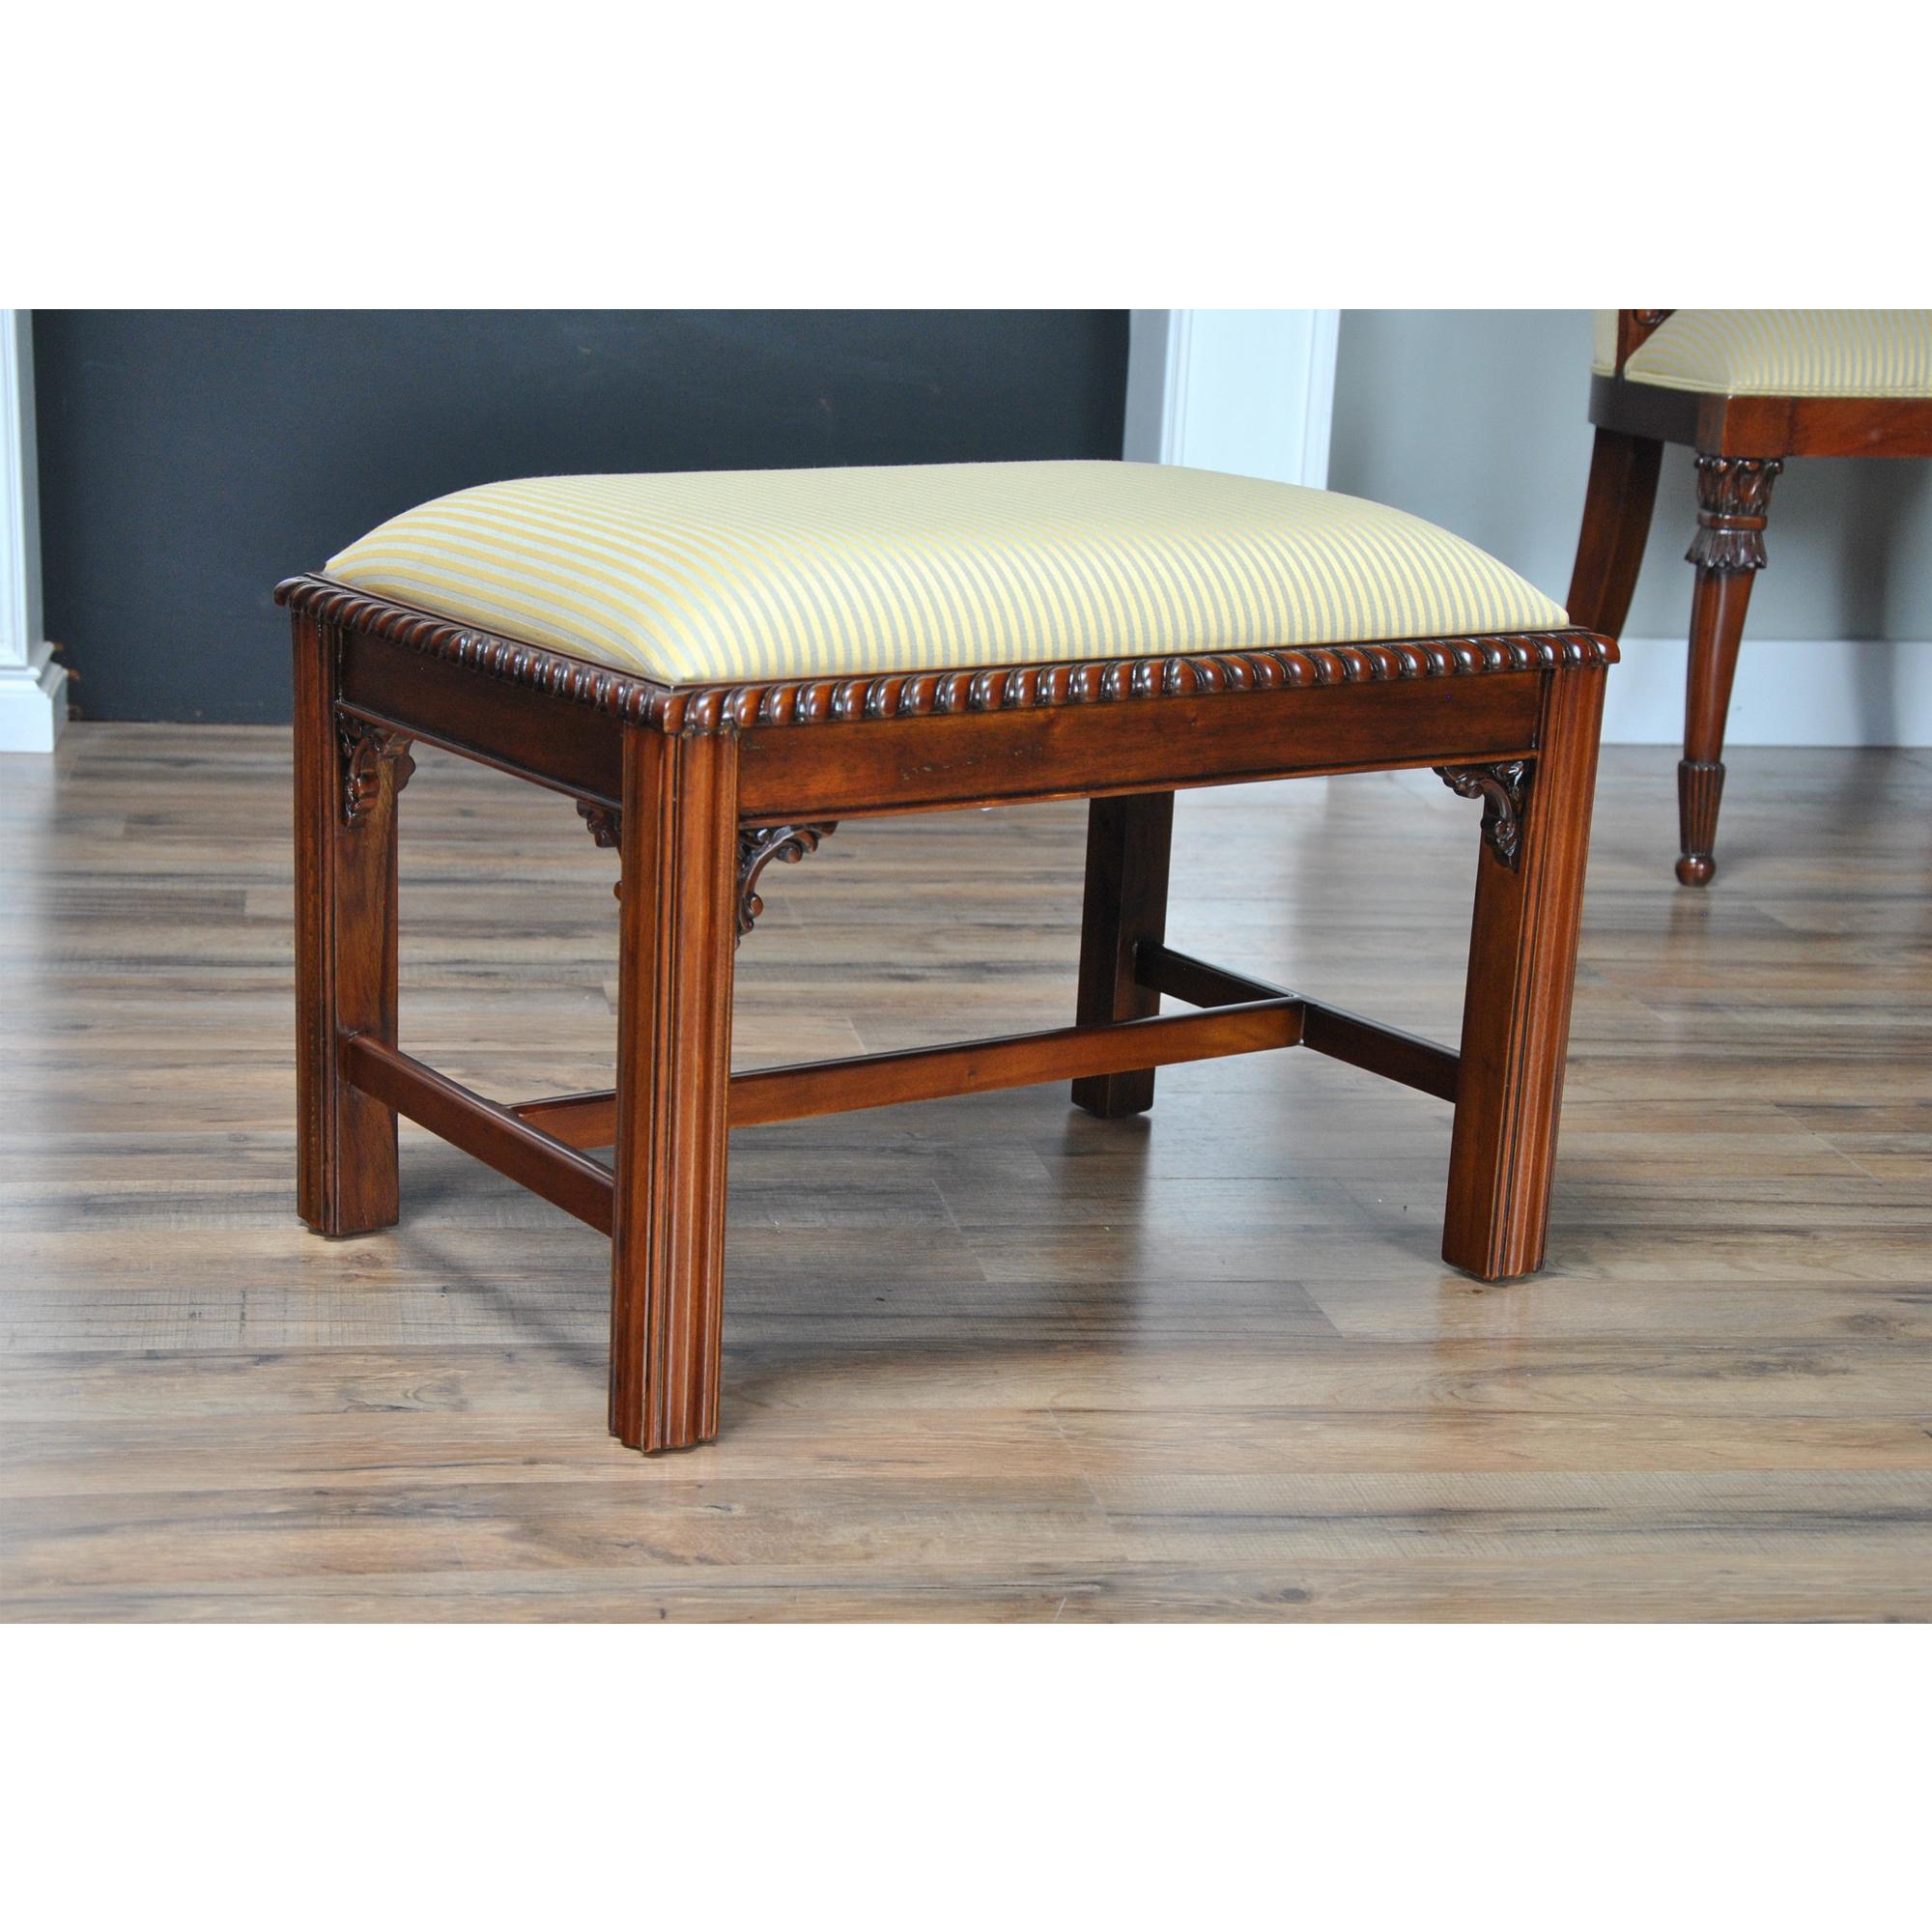 The Chippendale Bench with Cross Stretchers is a hand carved,  Chippendale style bench produced from solid, kiln dried, plantation grown, mahogany and features an upholstered slip seat on incised legs which are fitted with cross stretchers for extra